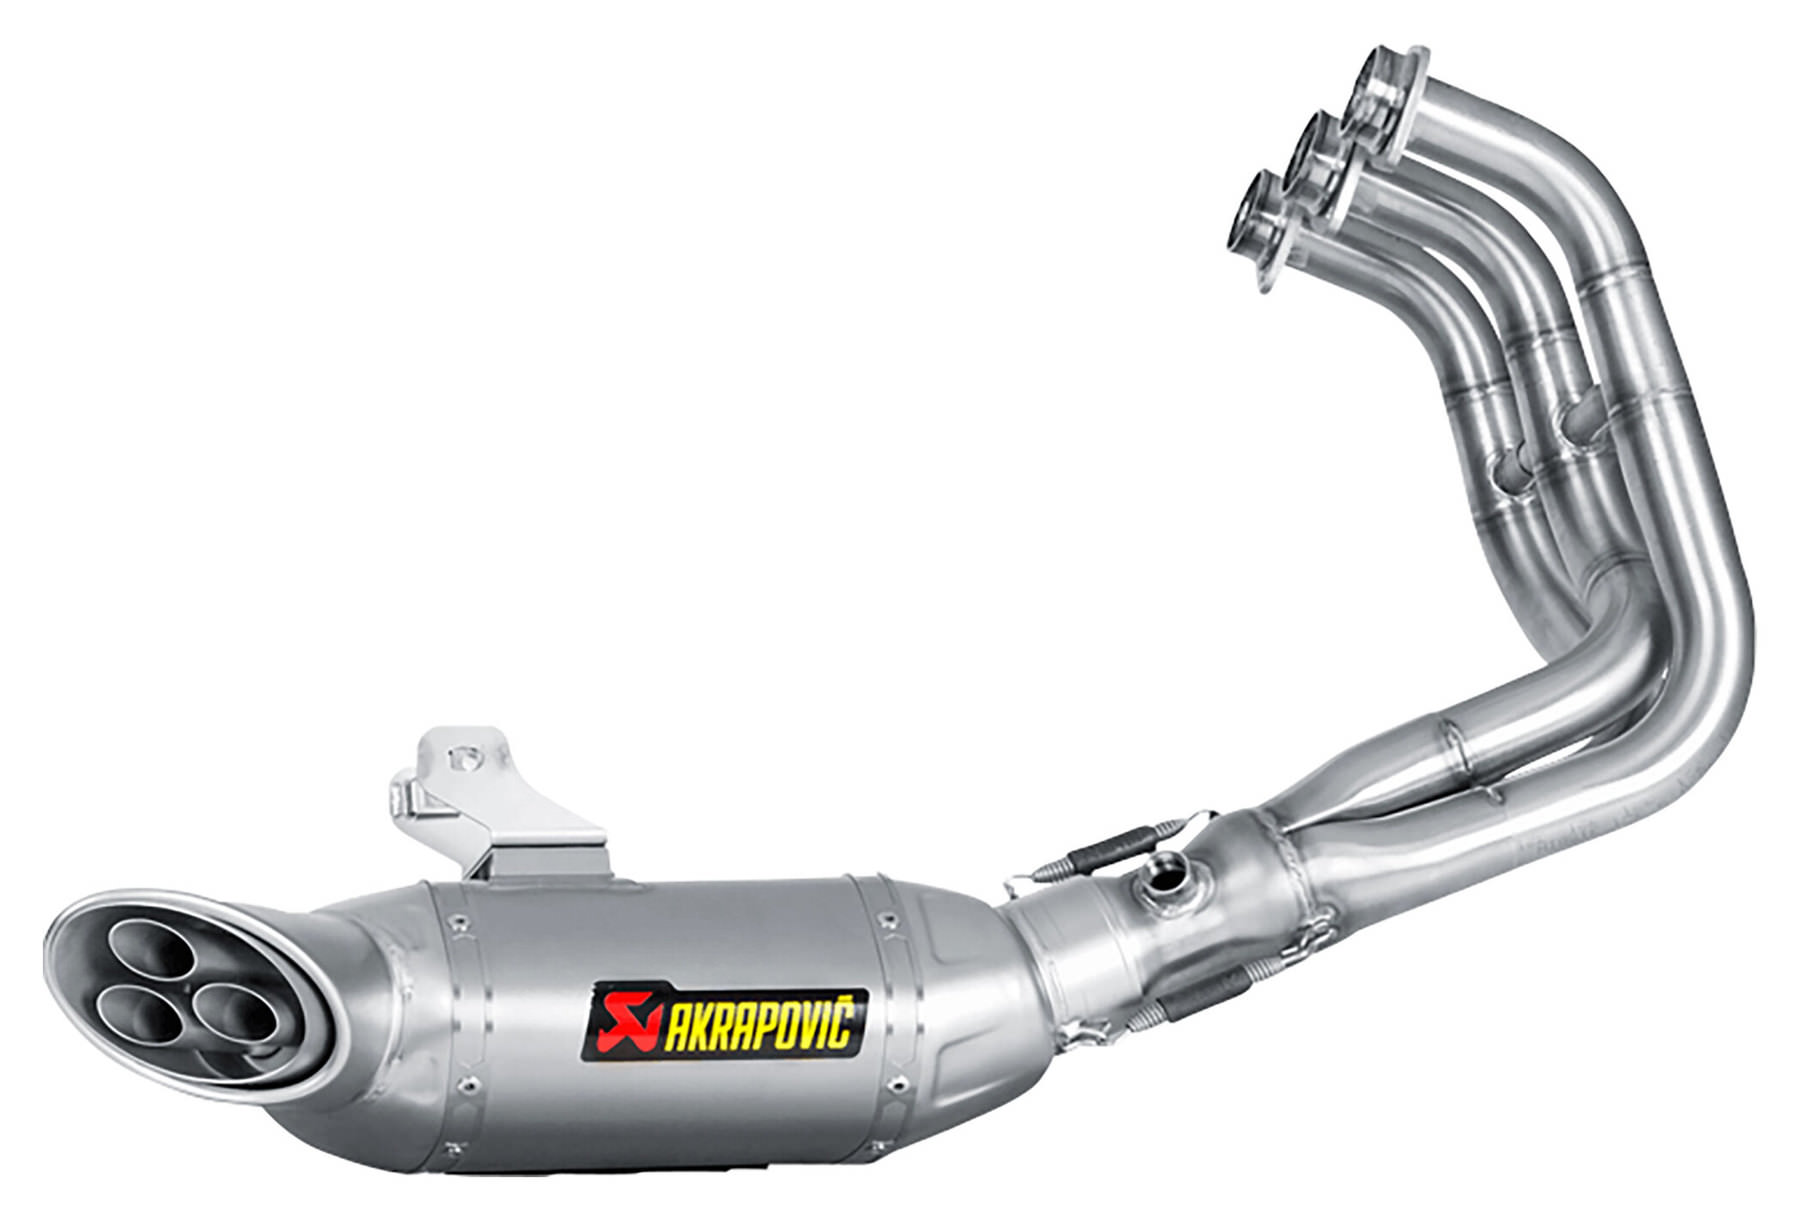 Akrapovic Racing-Line exhaust system with EG-BE Titanium, Stainless ...